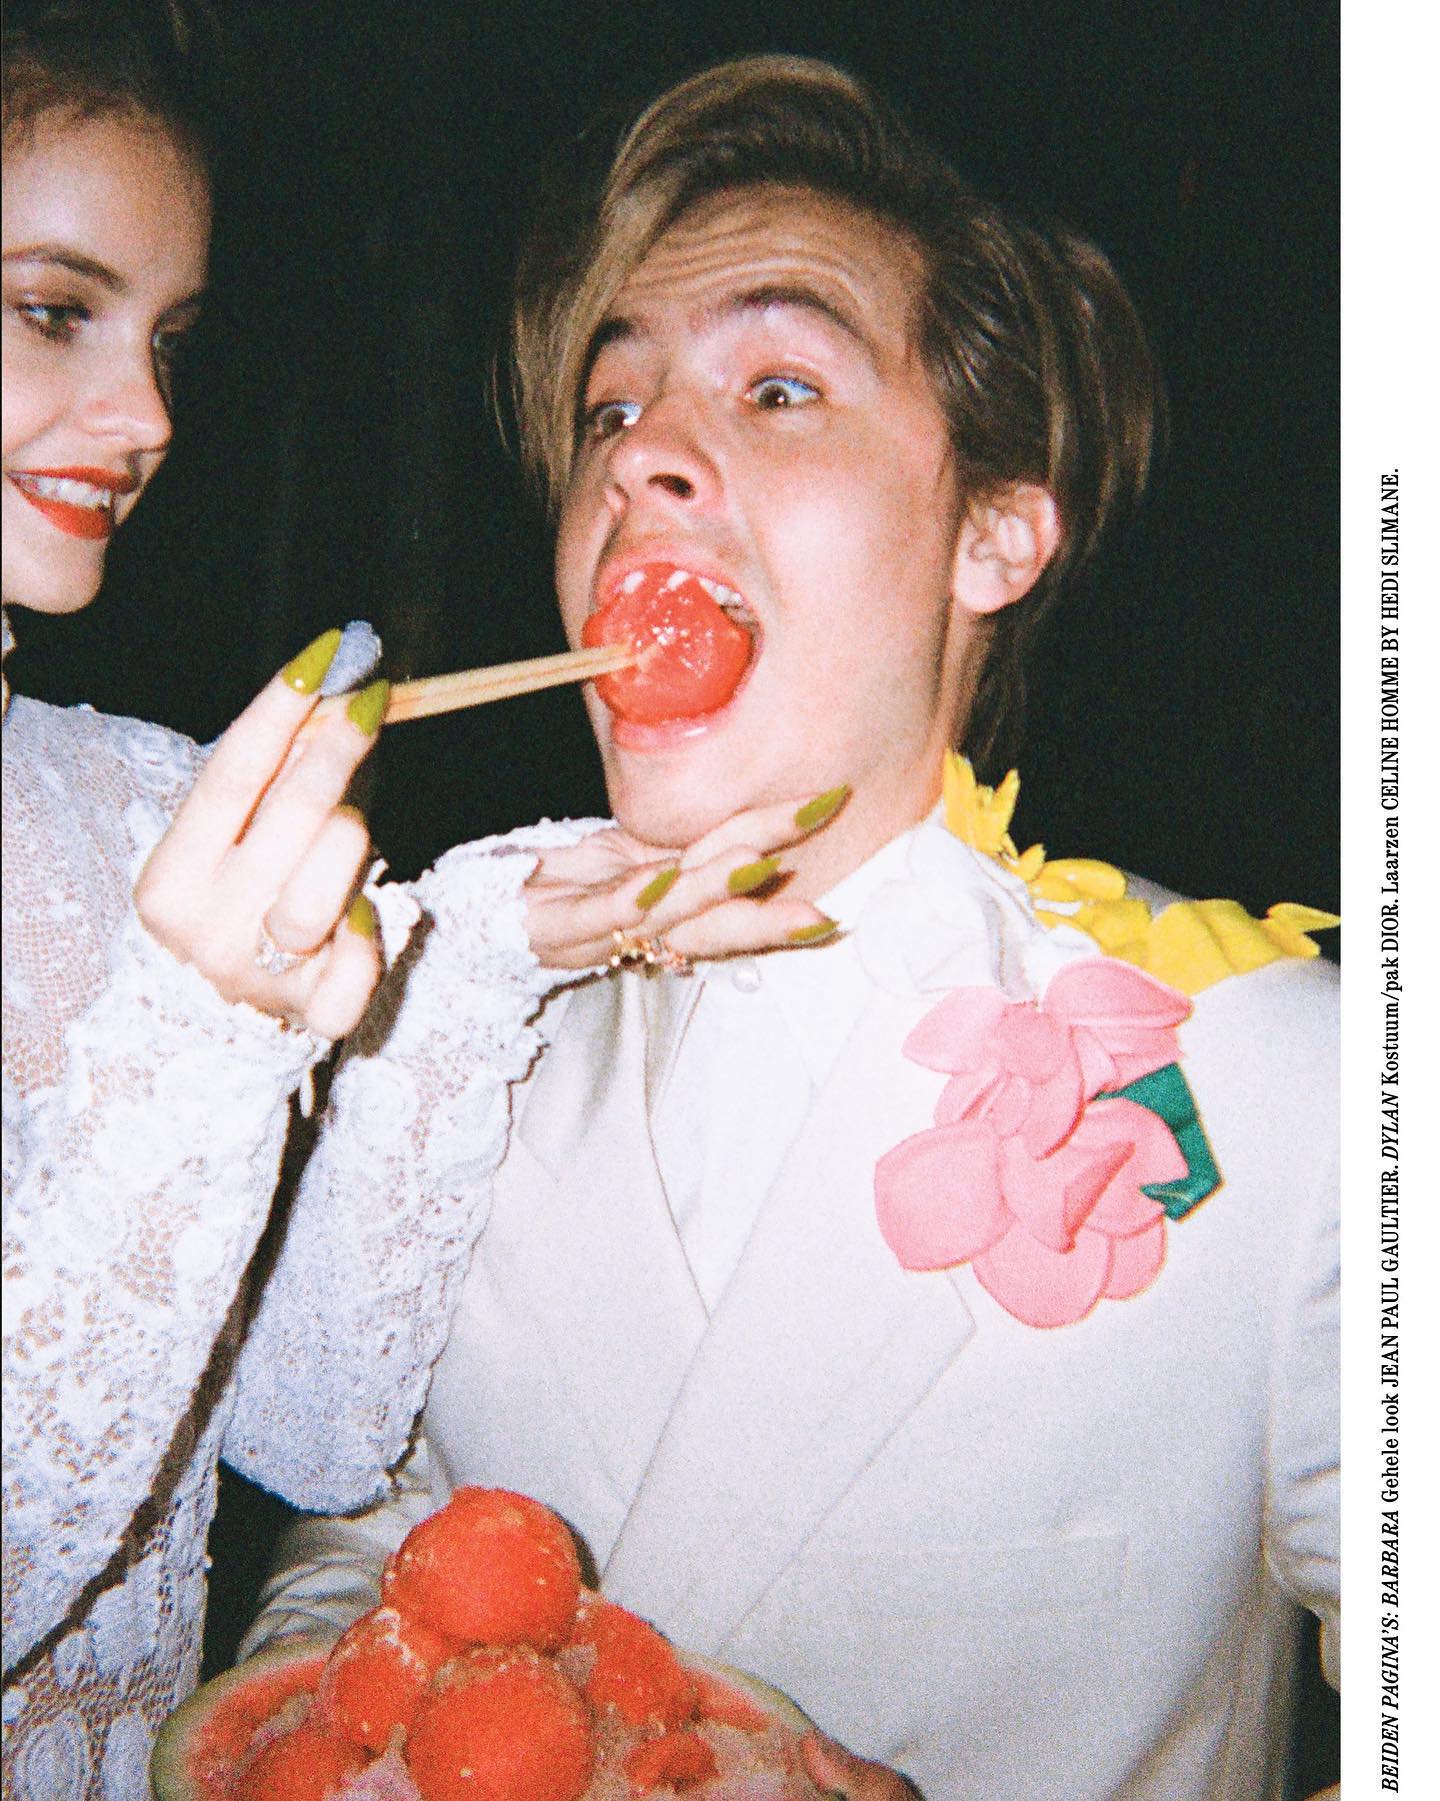 Barbara Palvin et Dylan Sprouse hit the Cover! - Photo 5